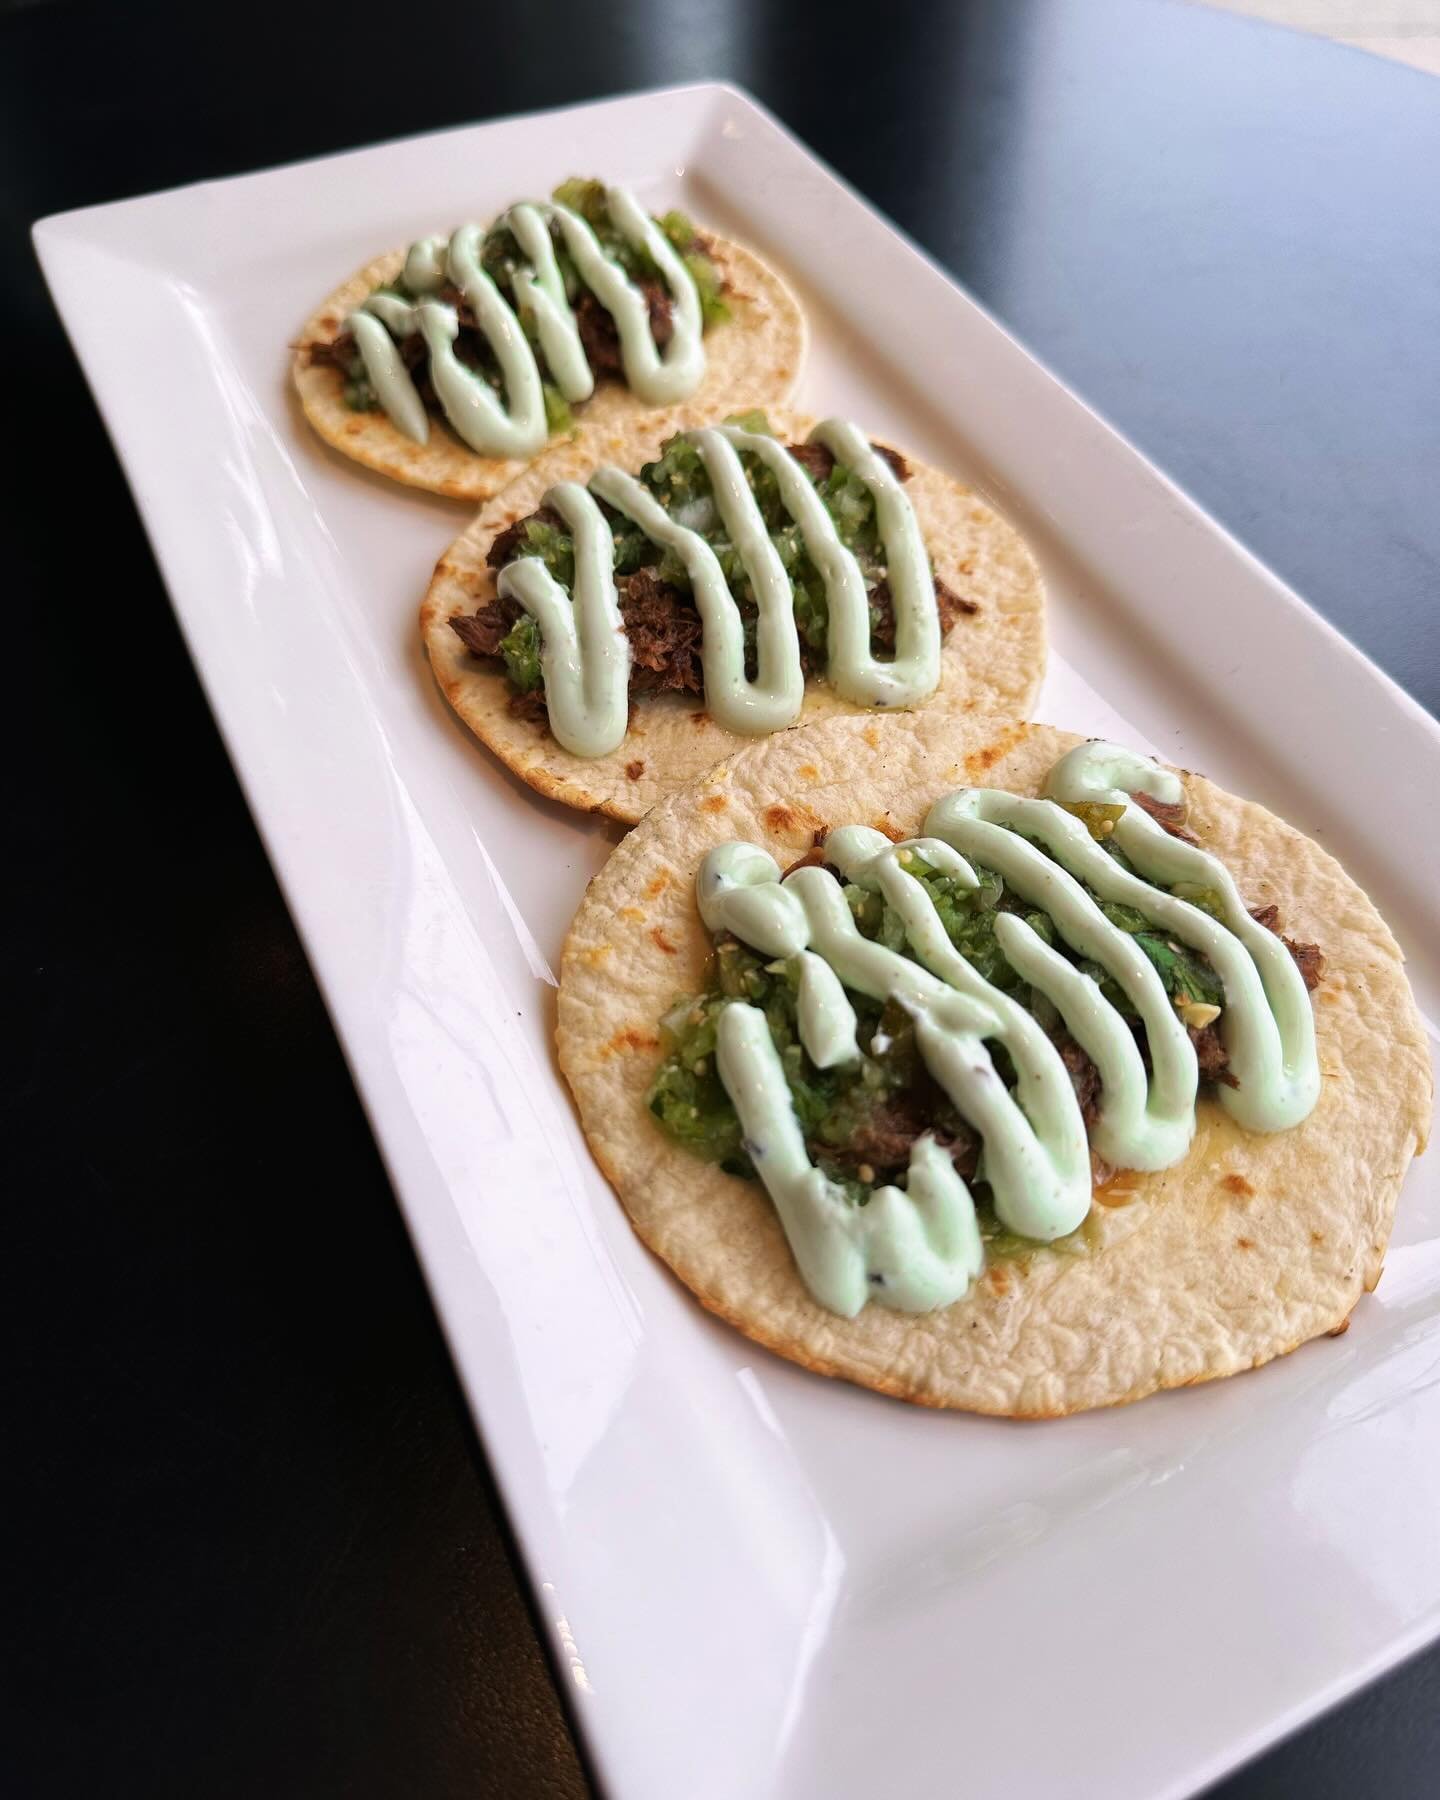 🌮 Taco Tuesday 🌮

This weeks taco special is chili lime shredded beef topped with salsa verde and crema

*Limited quantities available*